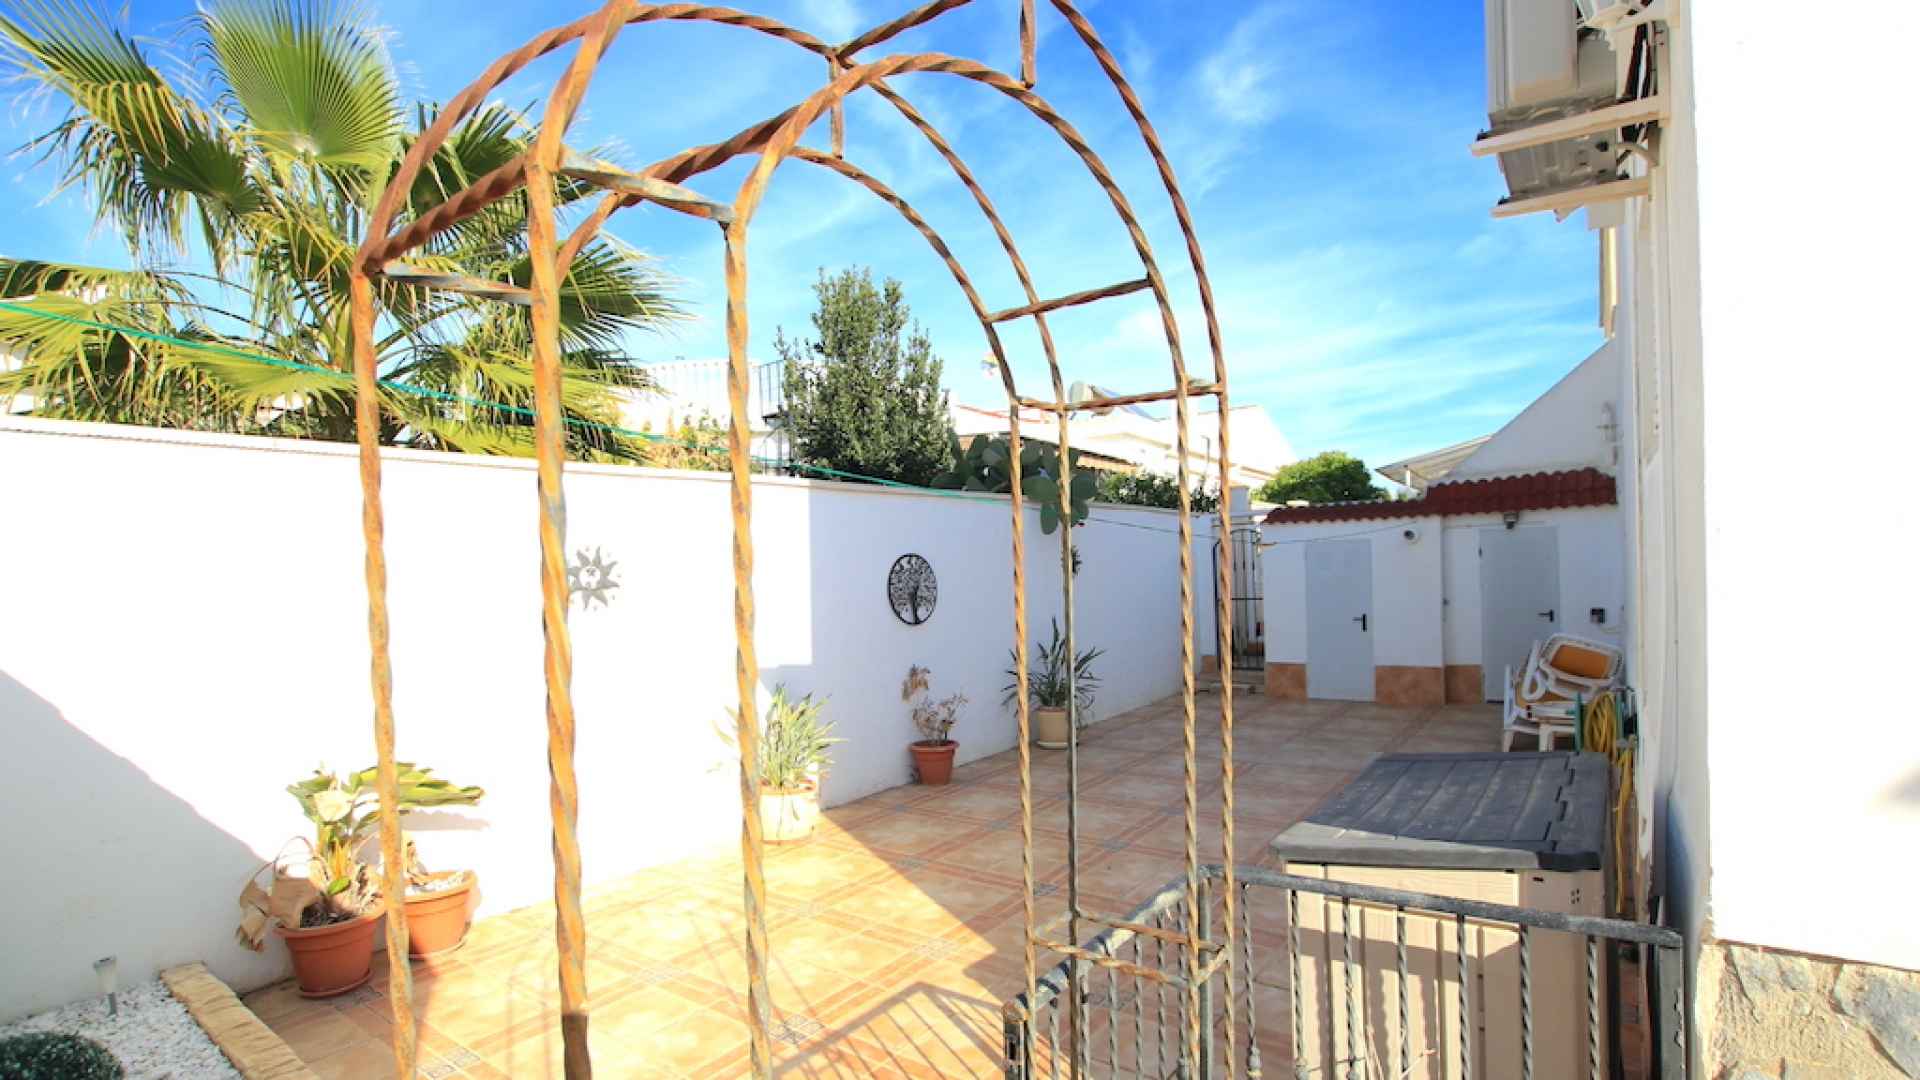 48358_expansive_4_bed_detached_villa_with_private_pool_and_garage_220224130511_img_7455